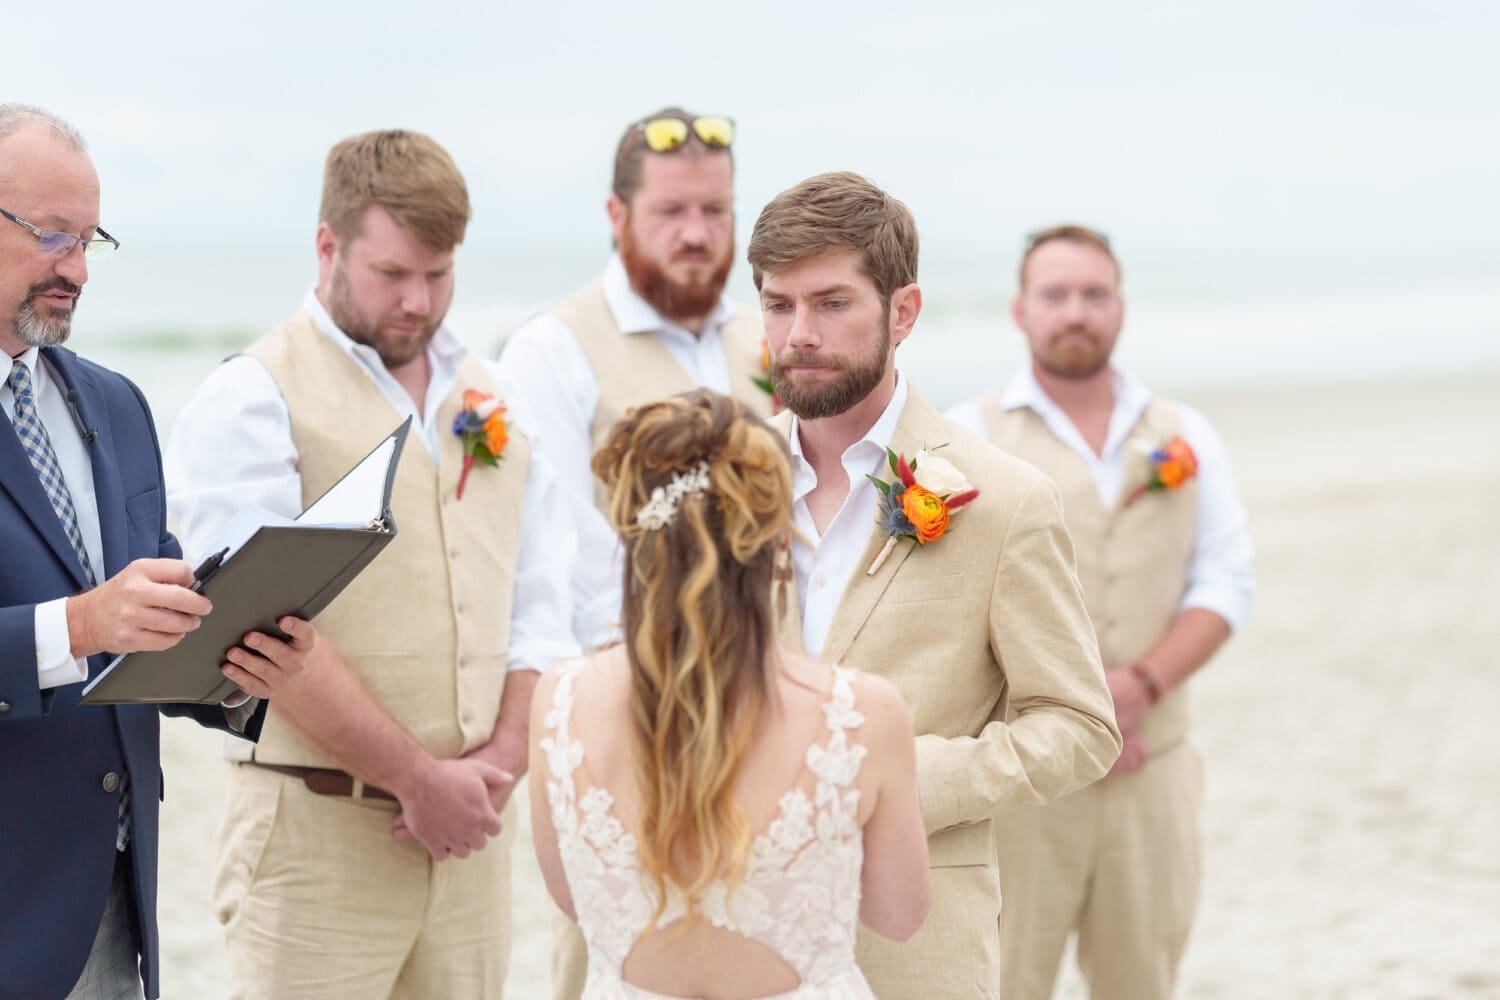 Groom looking at bride during the vows - 21 Main Events - North Myrtle Beach